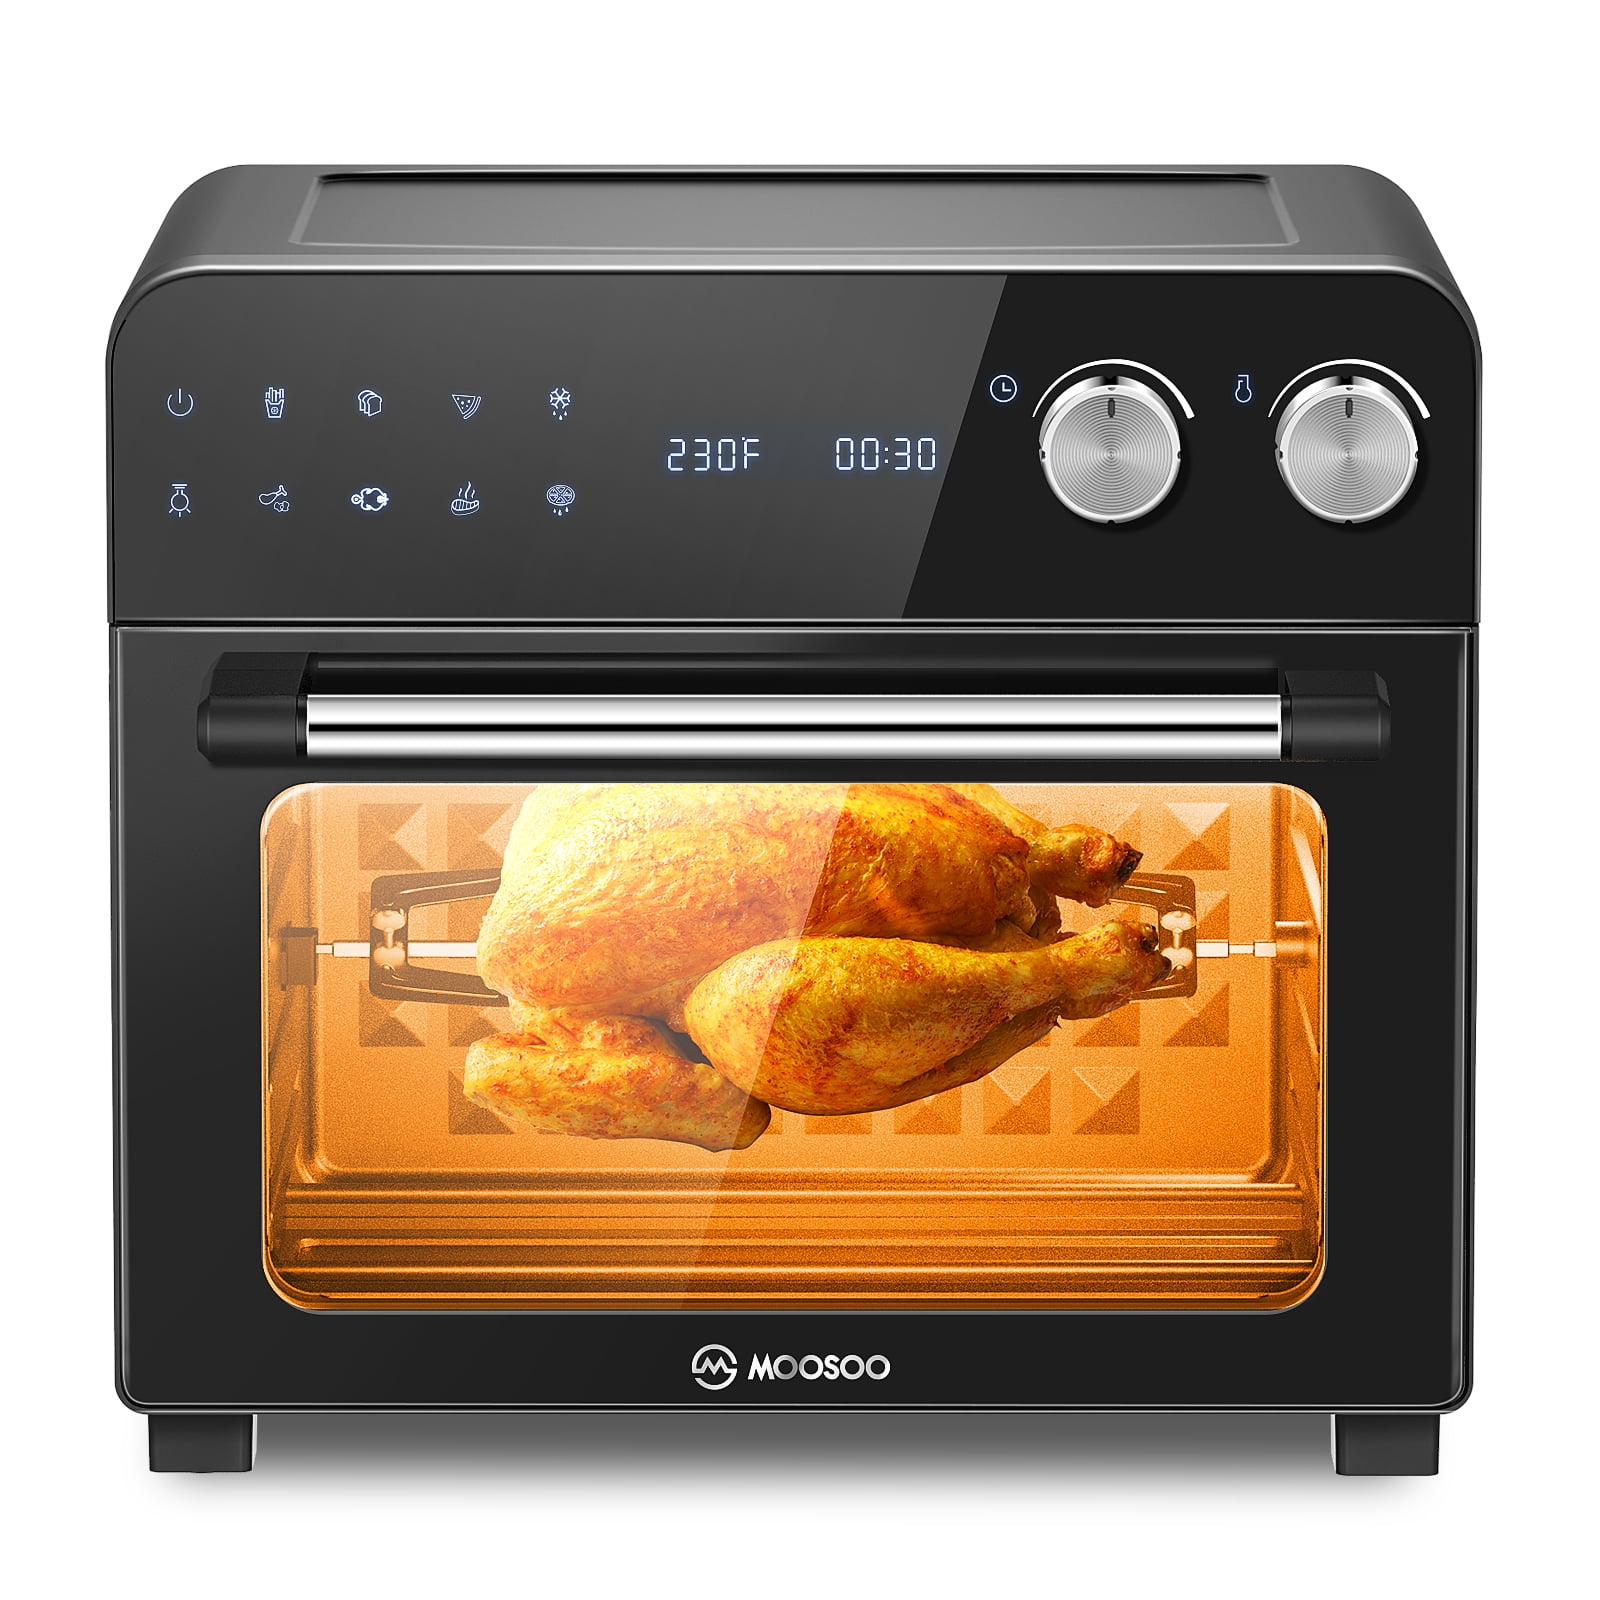 Insignia Air Fryer Review - Dad Got This